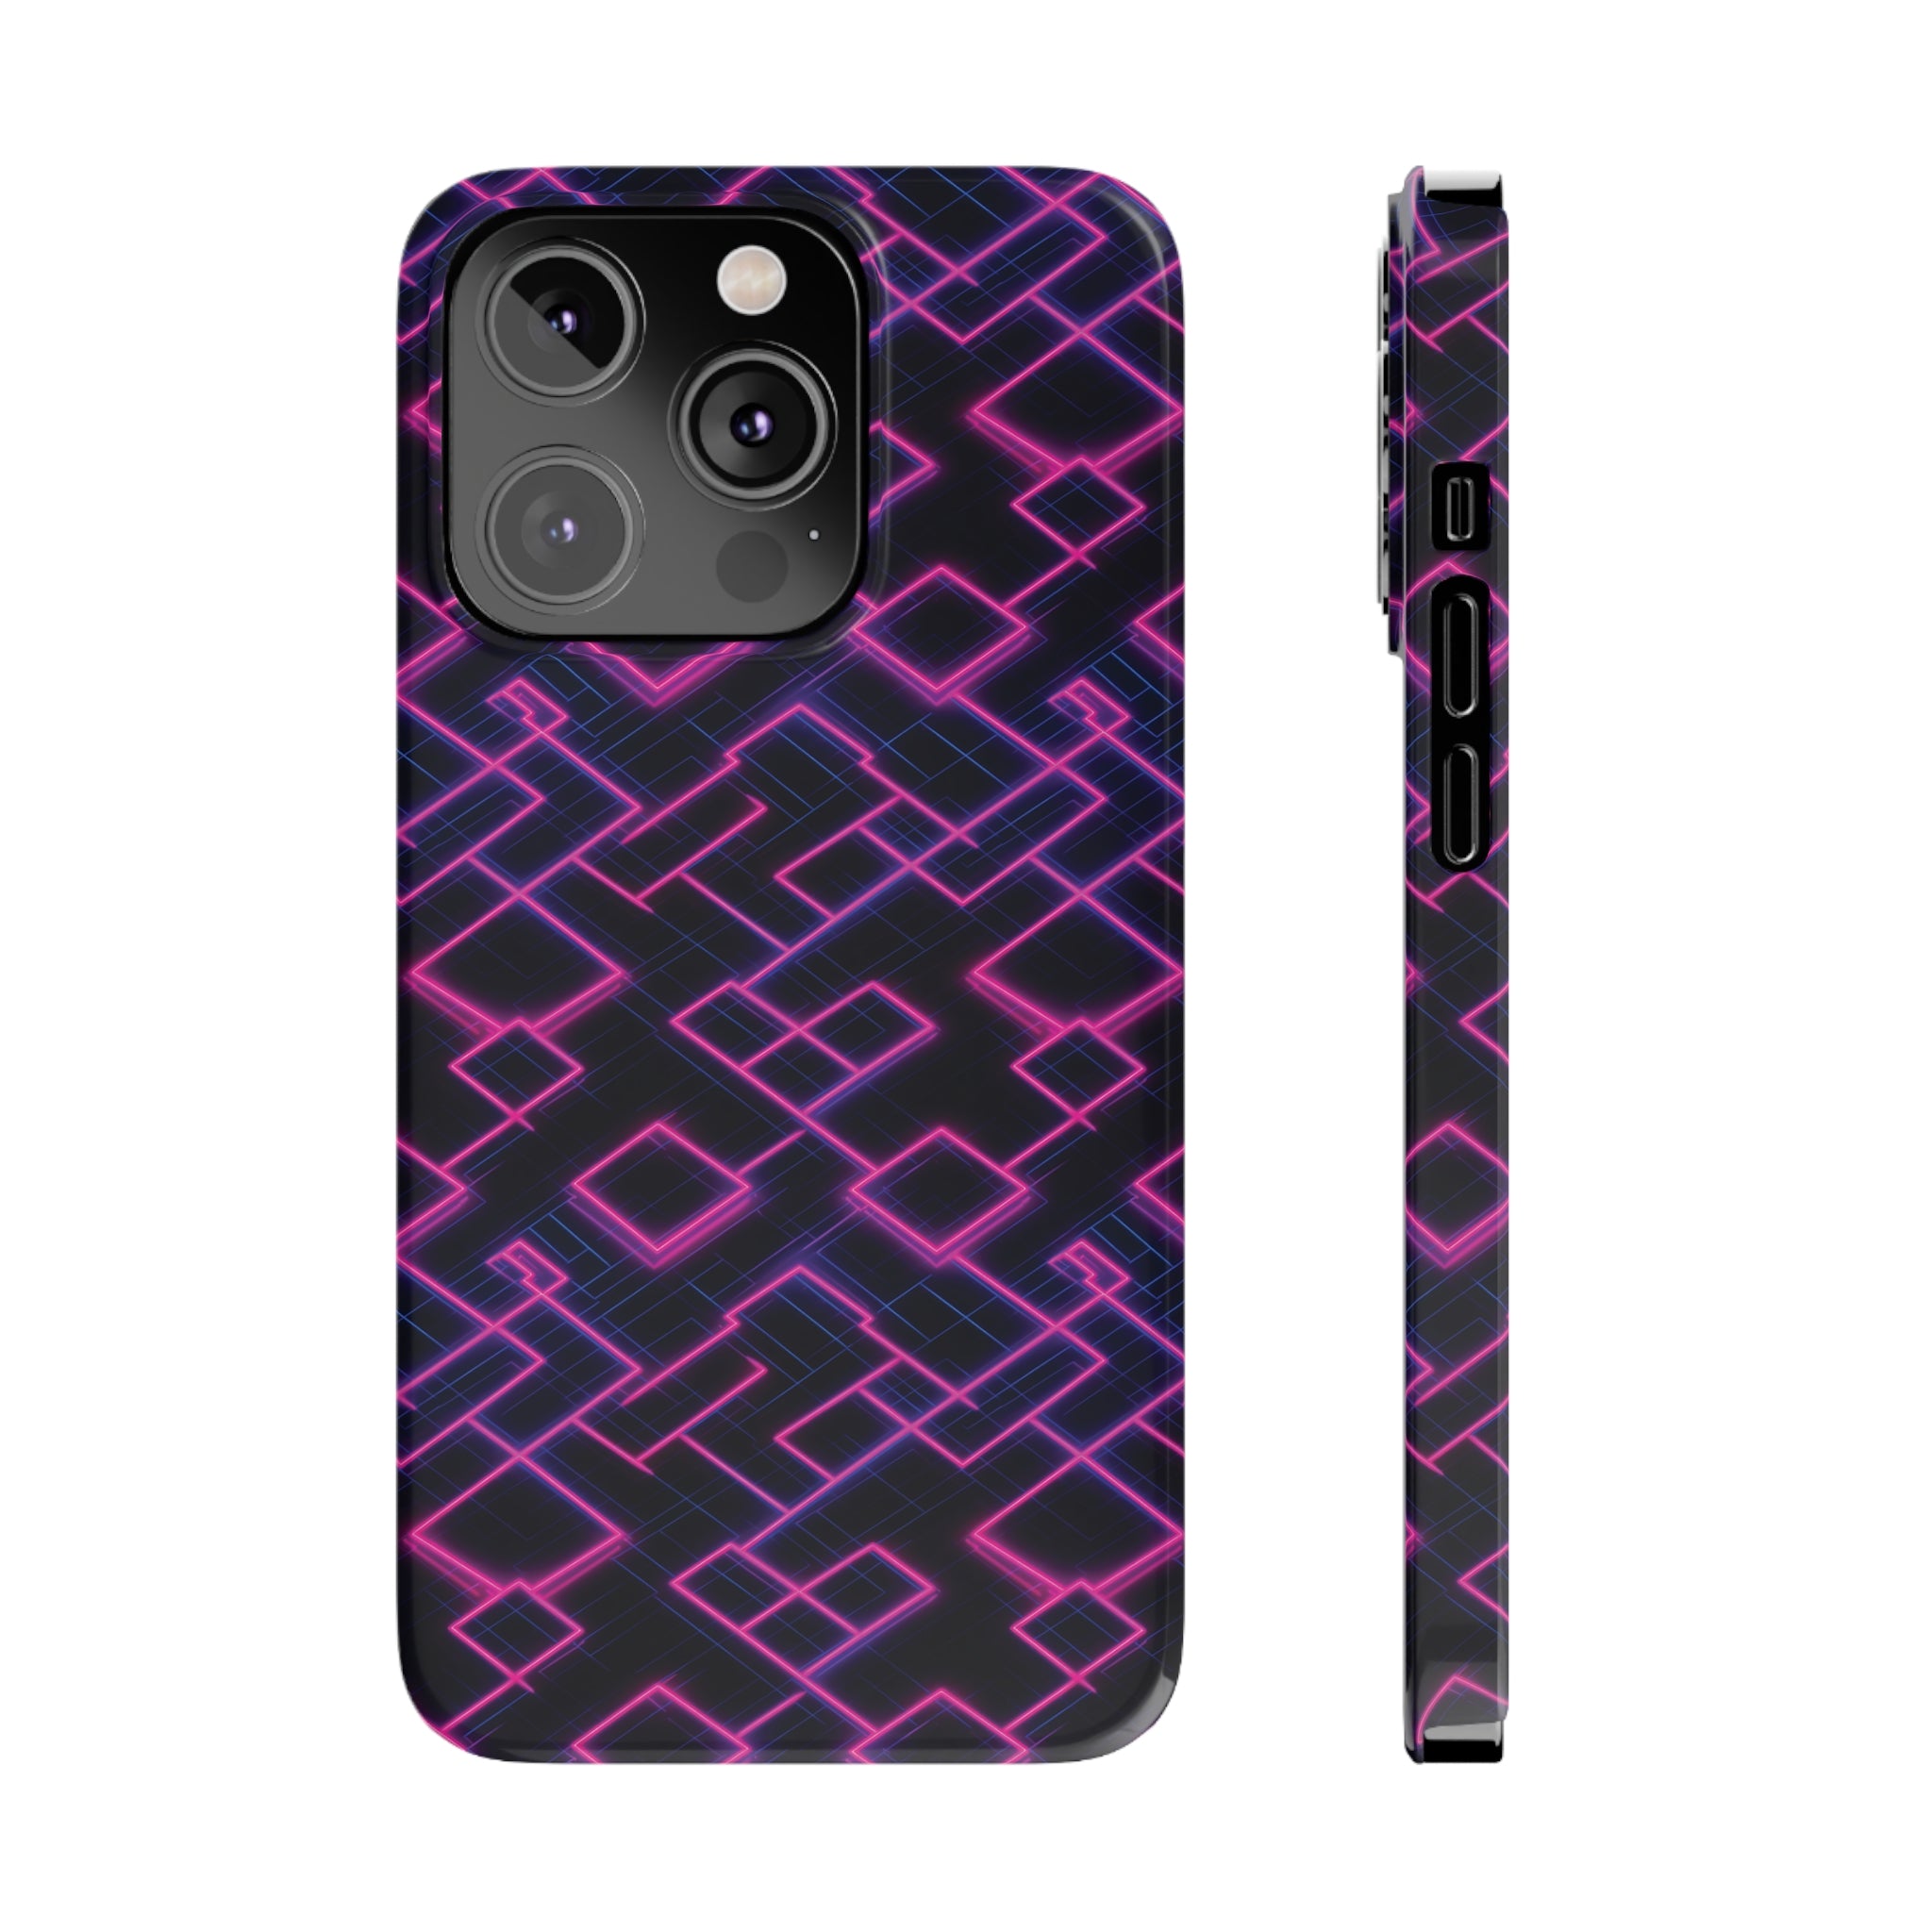 Slim Phone Cases (AOP) - Seamless Synthwave Designs 01